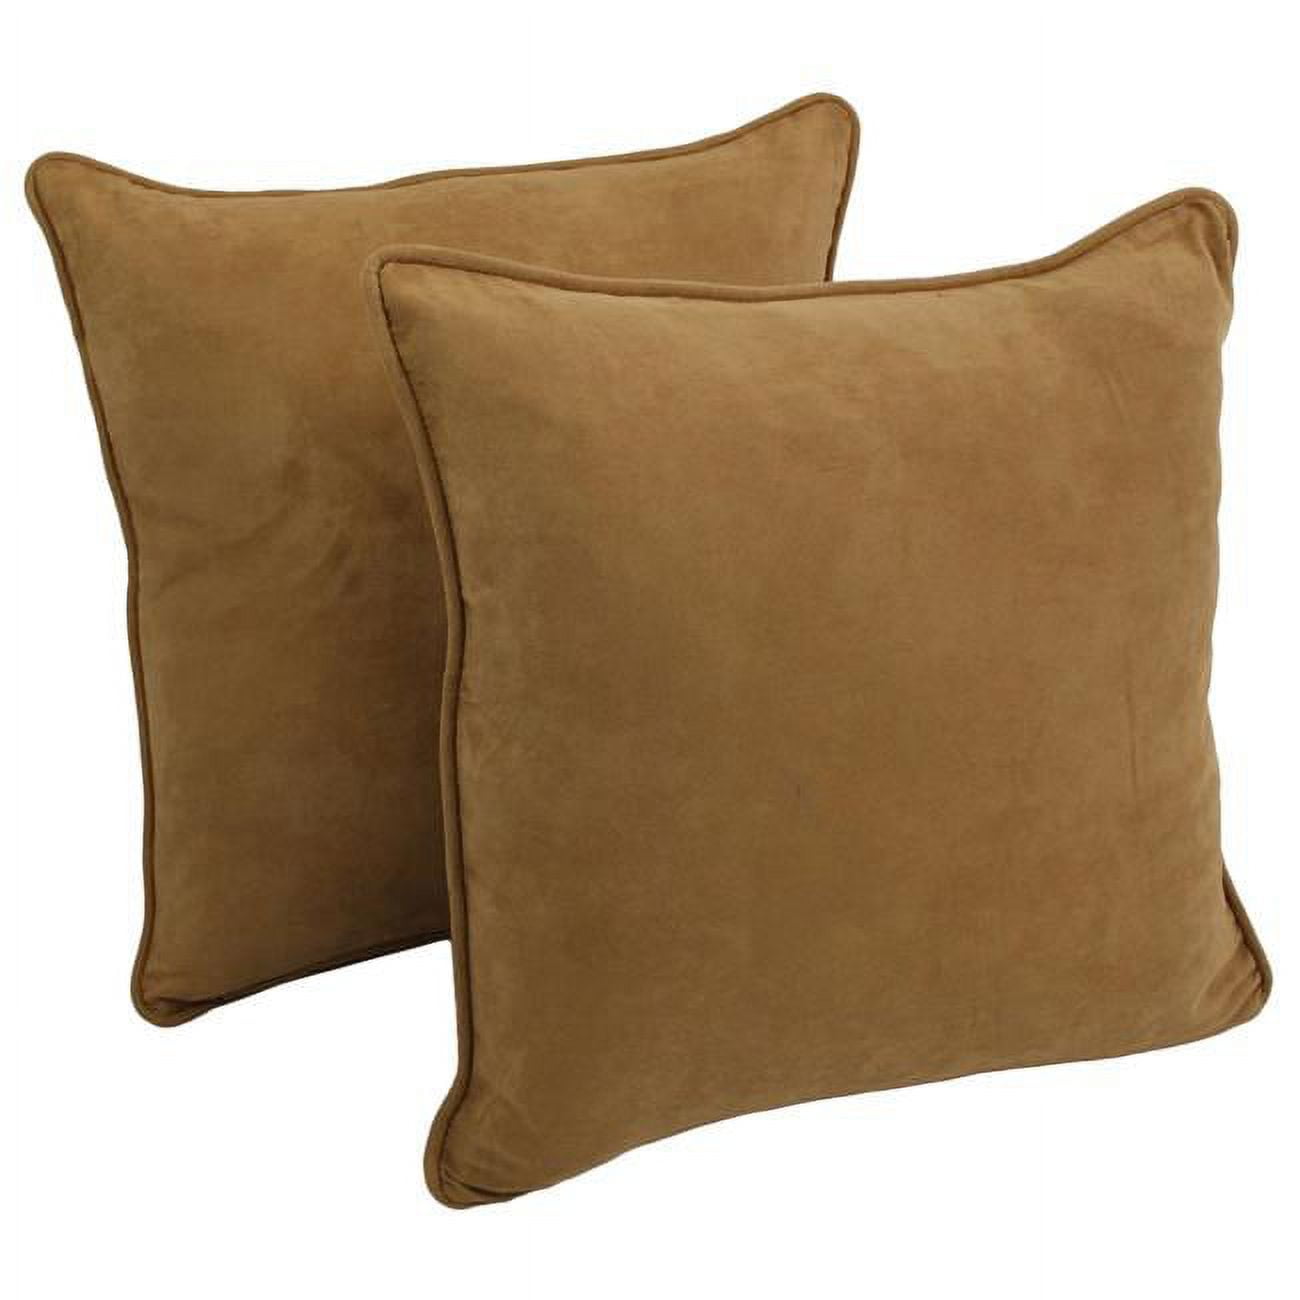 Picture of Blazing Needles 9813-CD-S2-MS-CM 25 in. Double-Corded Solid Microsuede Square Floor Pillows with Inserts, Camel - Set of 2